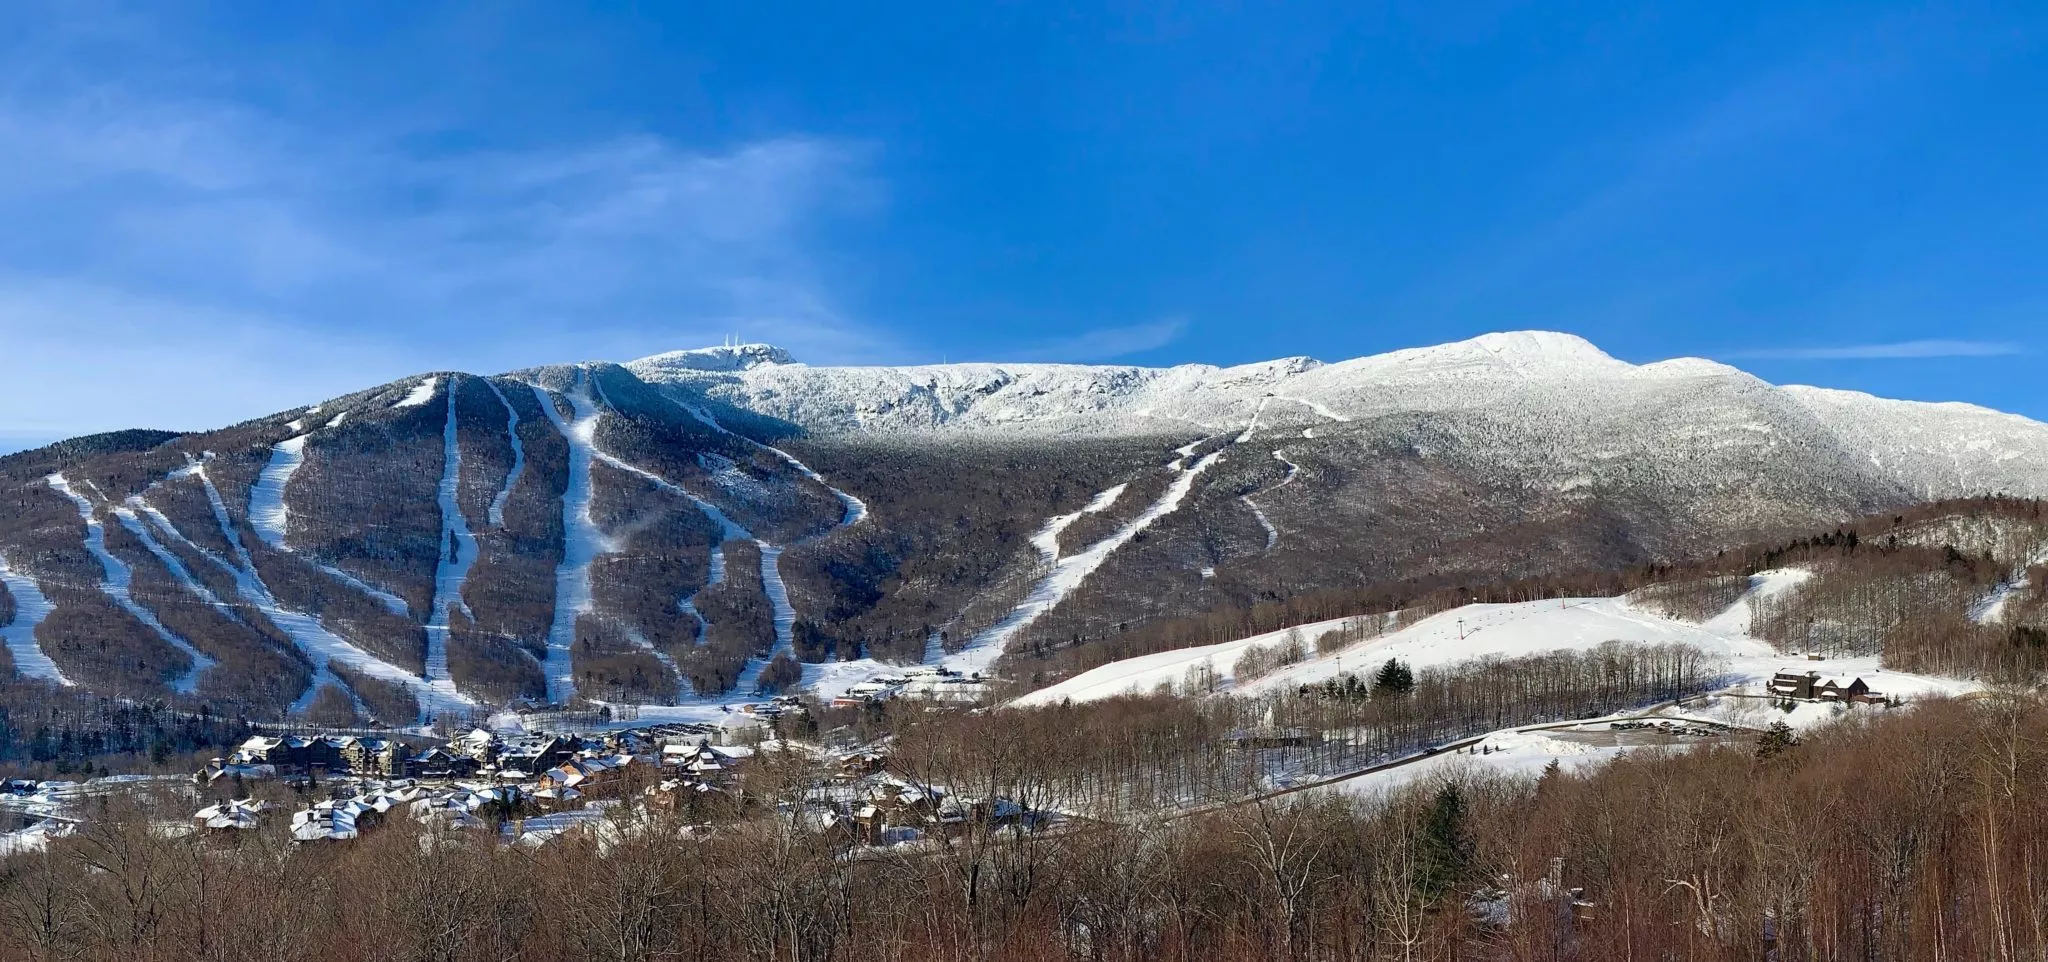 Mount Mansfield in USA, North America | Mountains - Rated 4